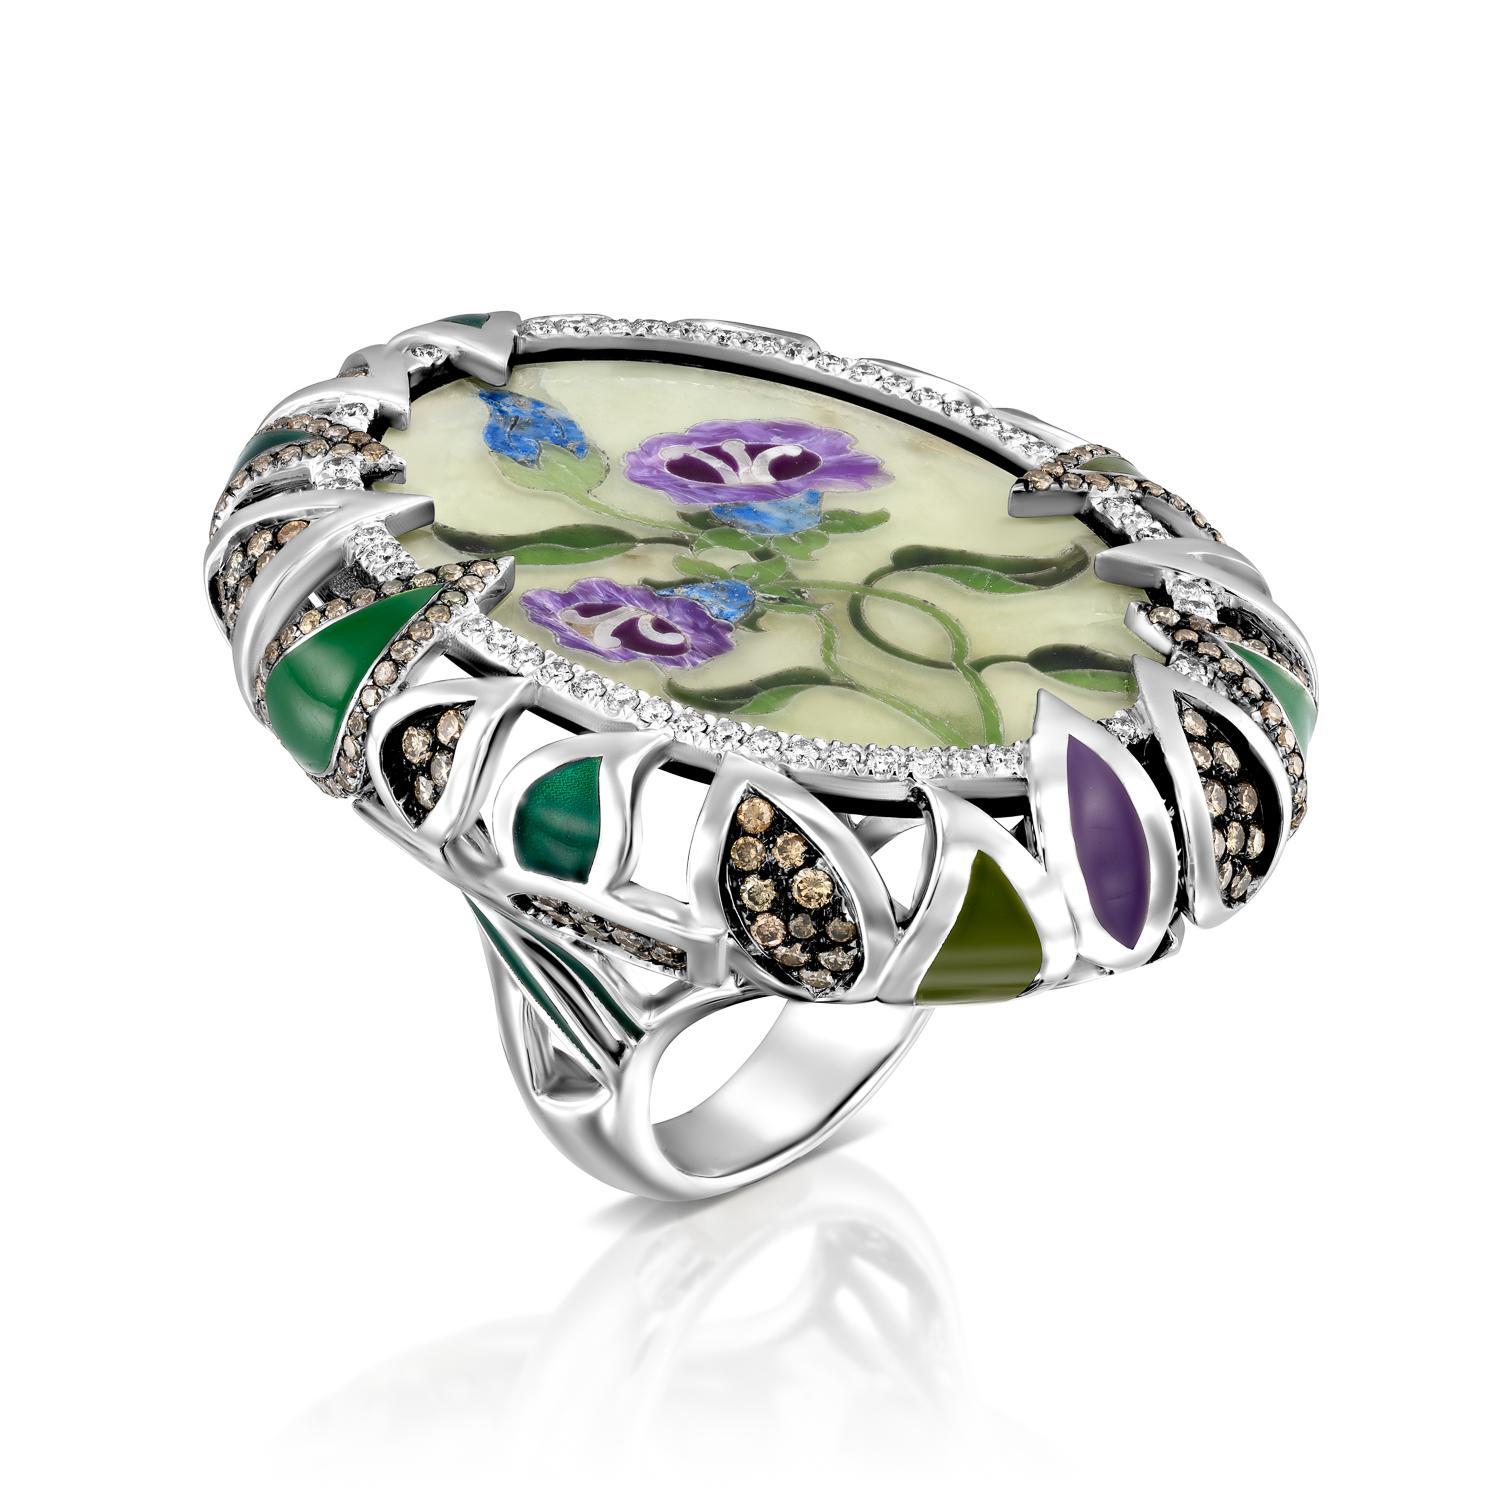 Exquisite and bold Mosaic and enamel flower ring shimmer with 18k Gold, White and Champagne Diamonds. The Mosaic flower center piece is a work of art made from gem stones like, lapis, agate, jade amethyst and more. 
206 white Diamonds F color and VS